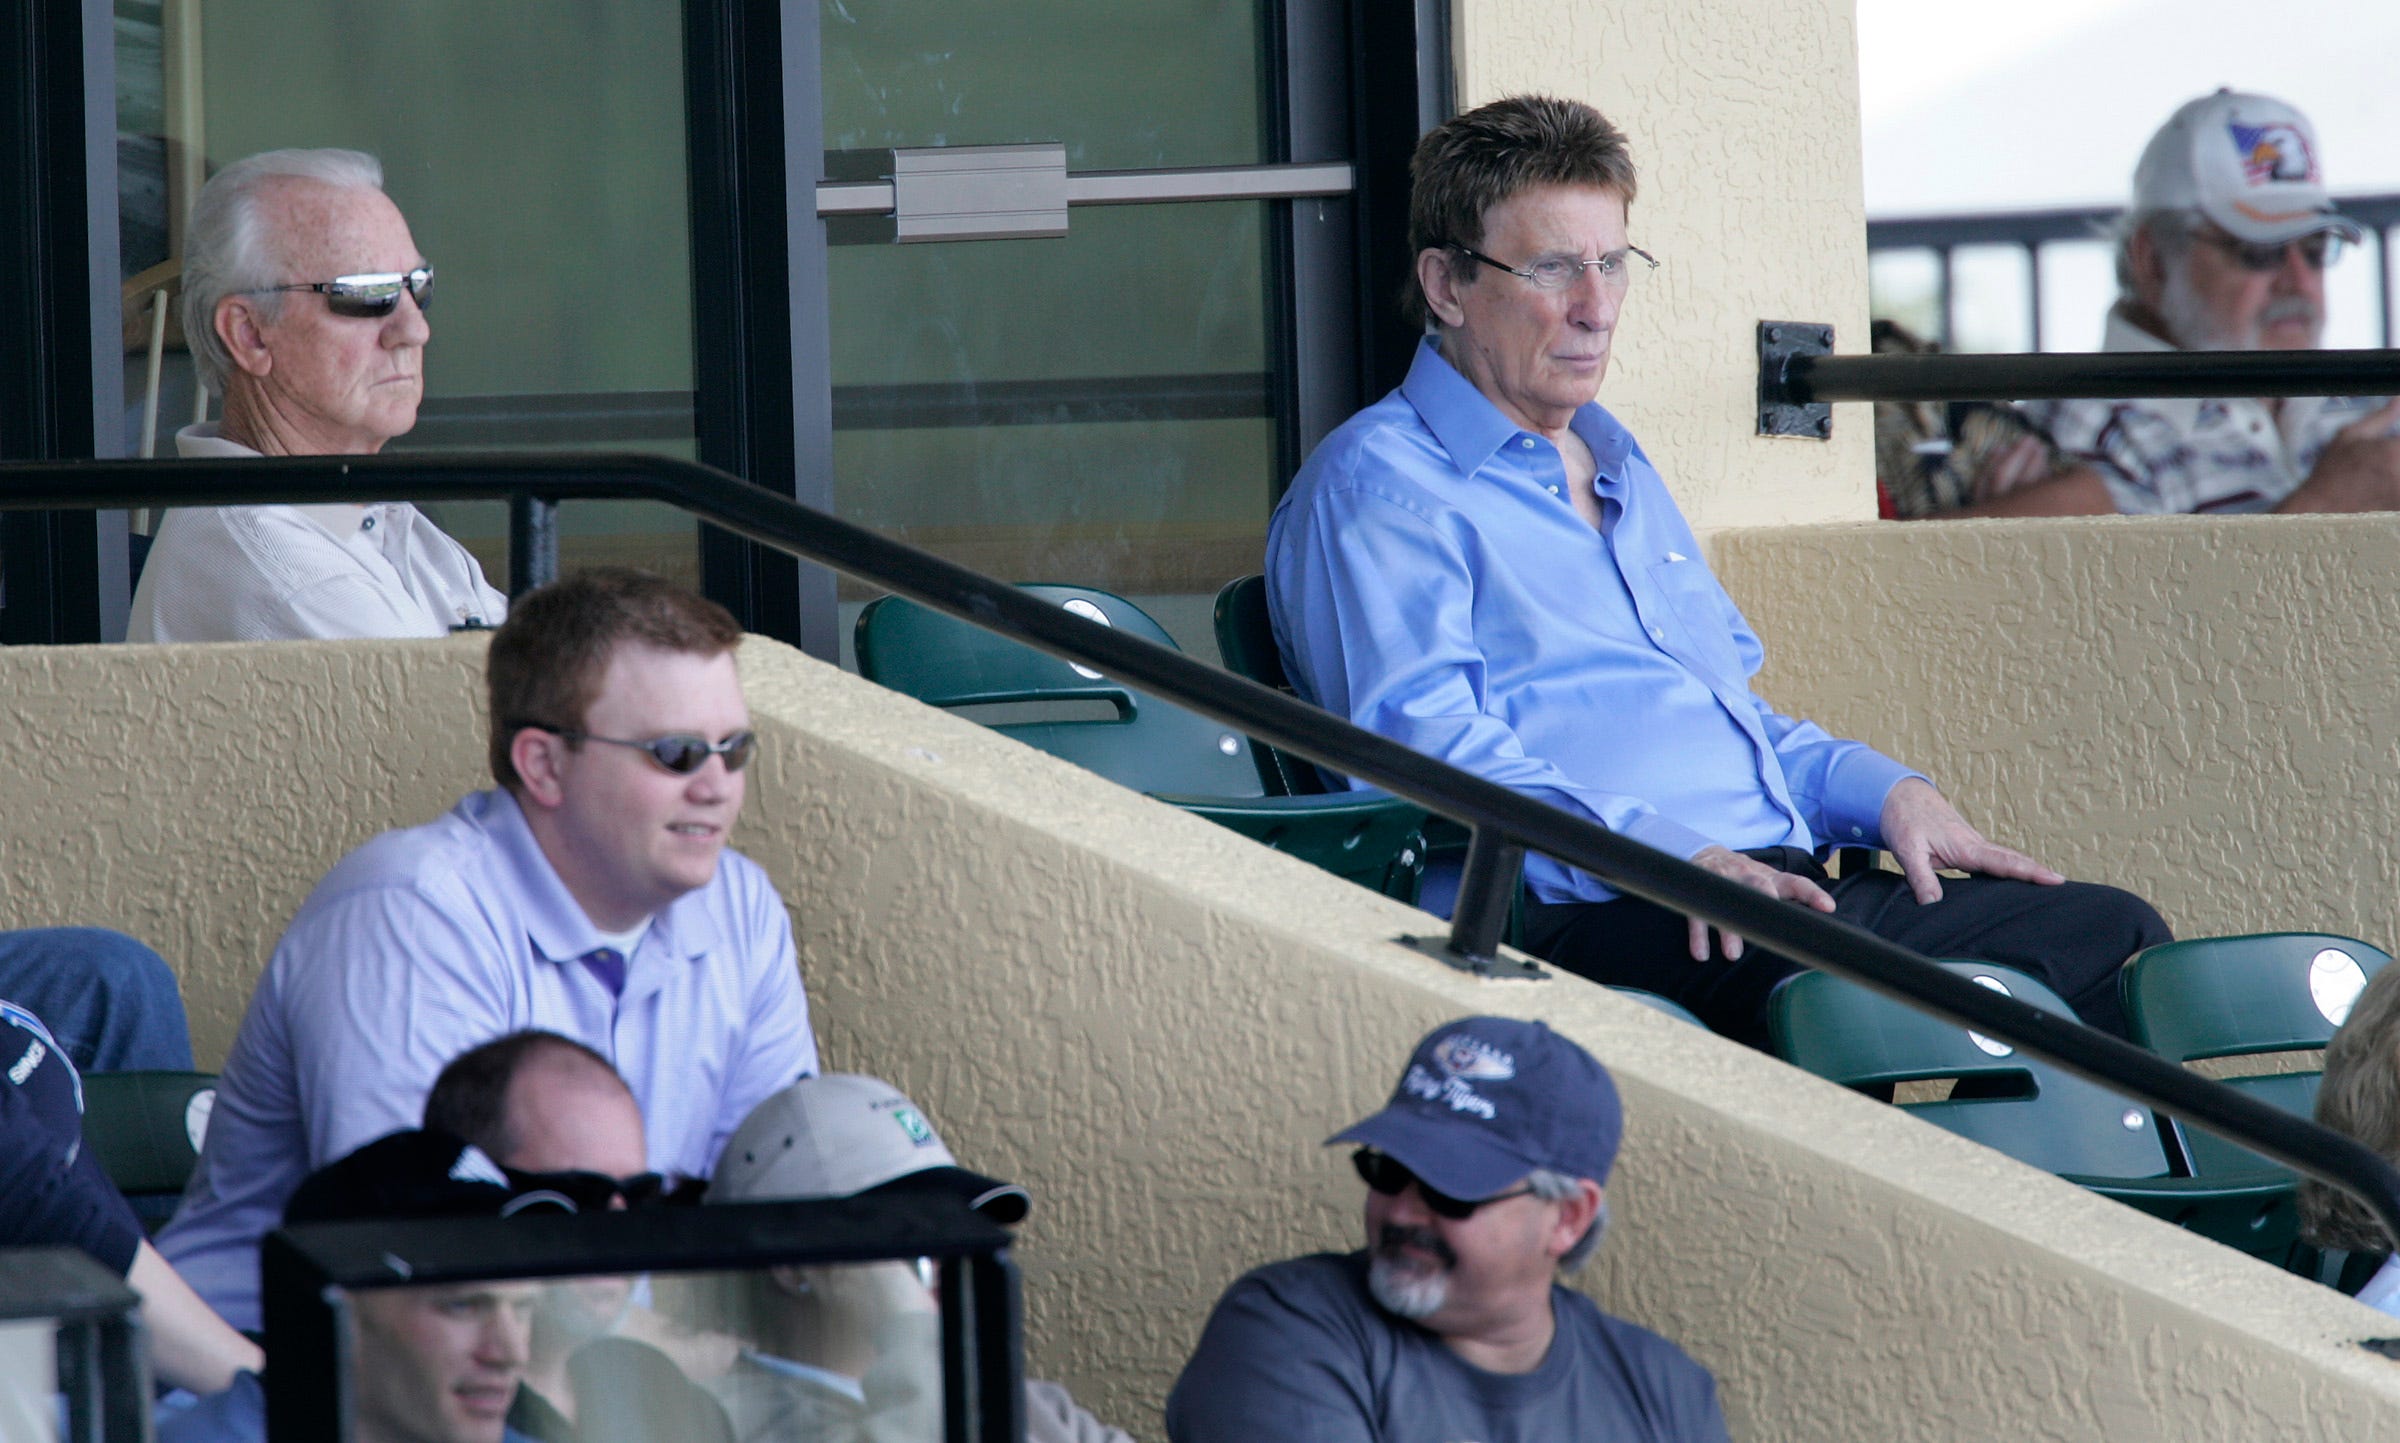 Tigers owner Mike Ilitch, right, watches the game with Al Kaline, far left,  as the Detroit Tigers take on the Atlanta Braves at Joker Marchant Stadium in Tampa, Fla. on March 7, 2007.